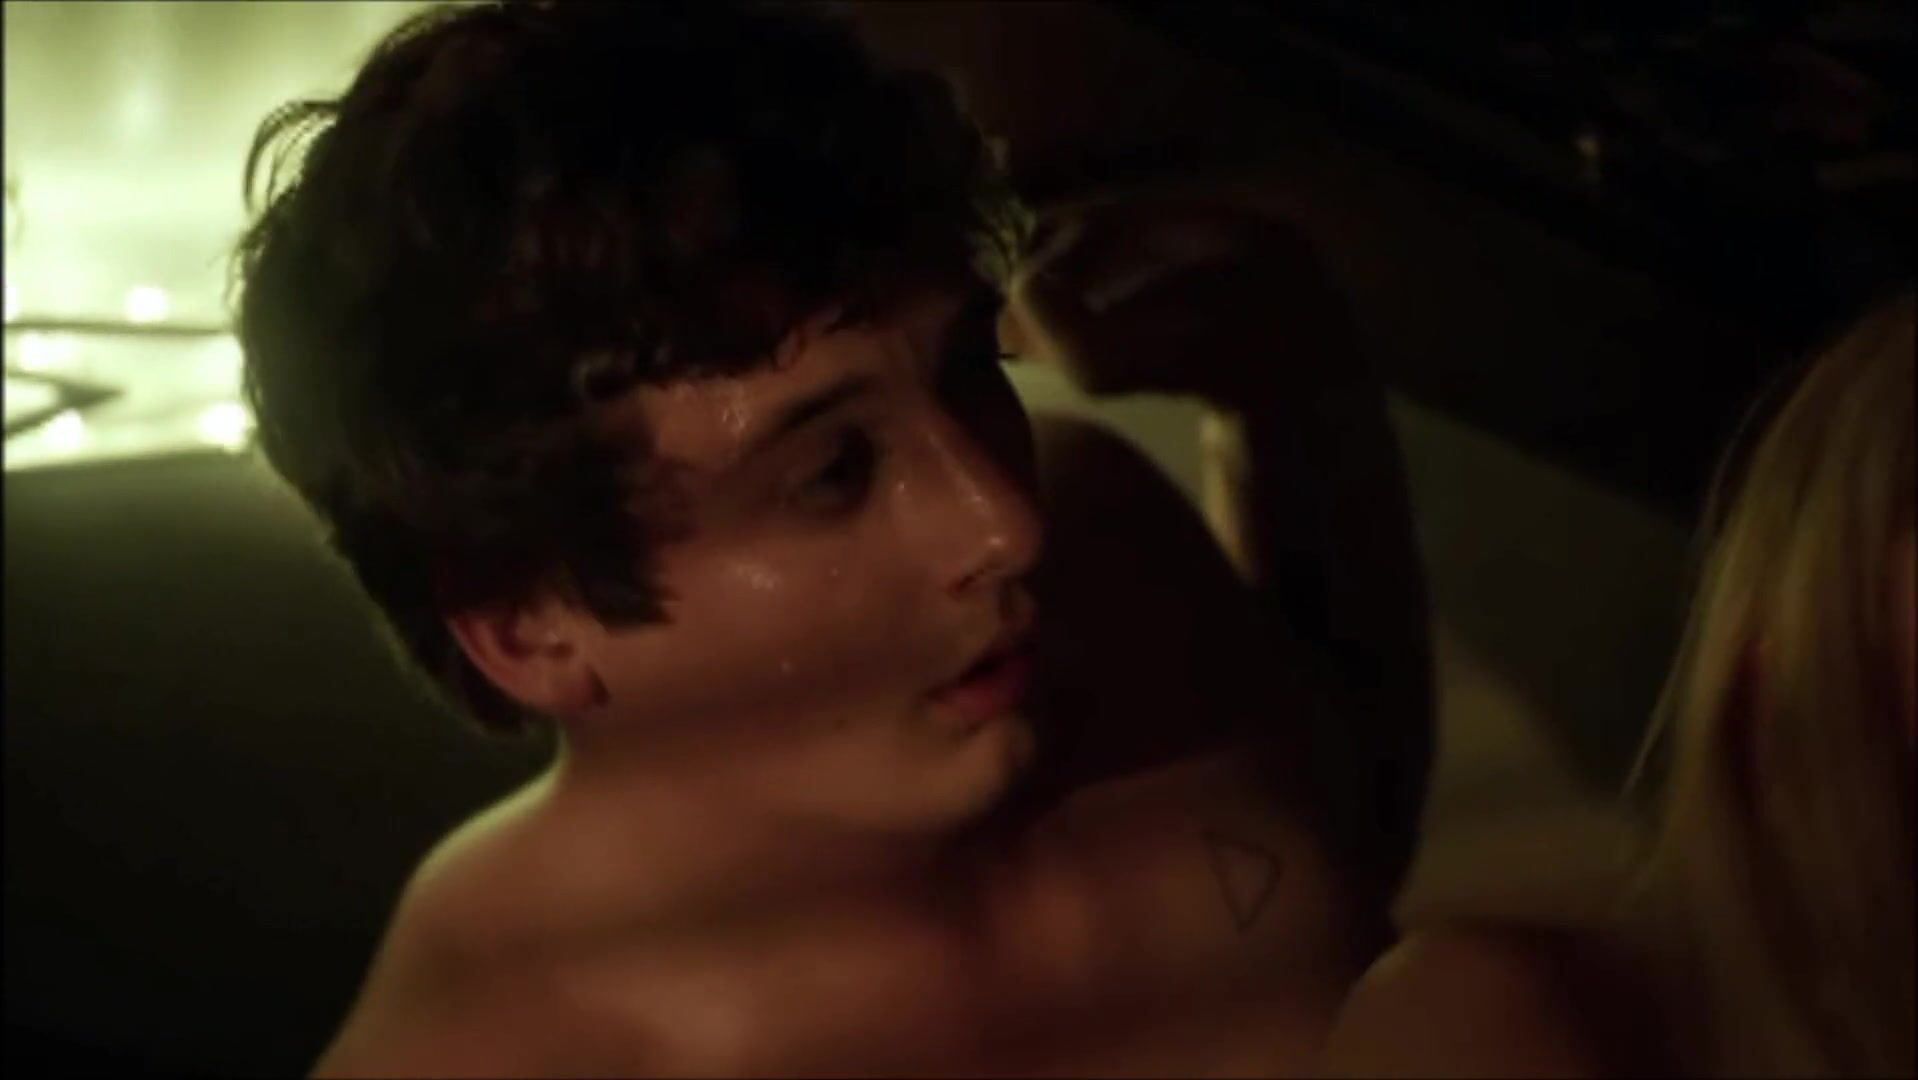 Nudity Babes are wildly nailed in different situations from TV series Shameless Season 2 Joven